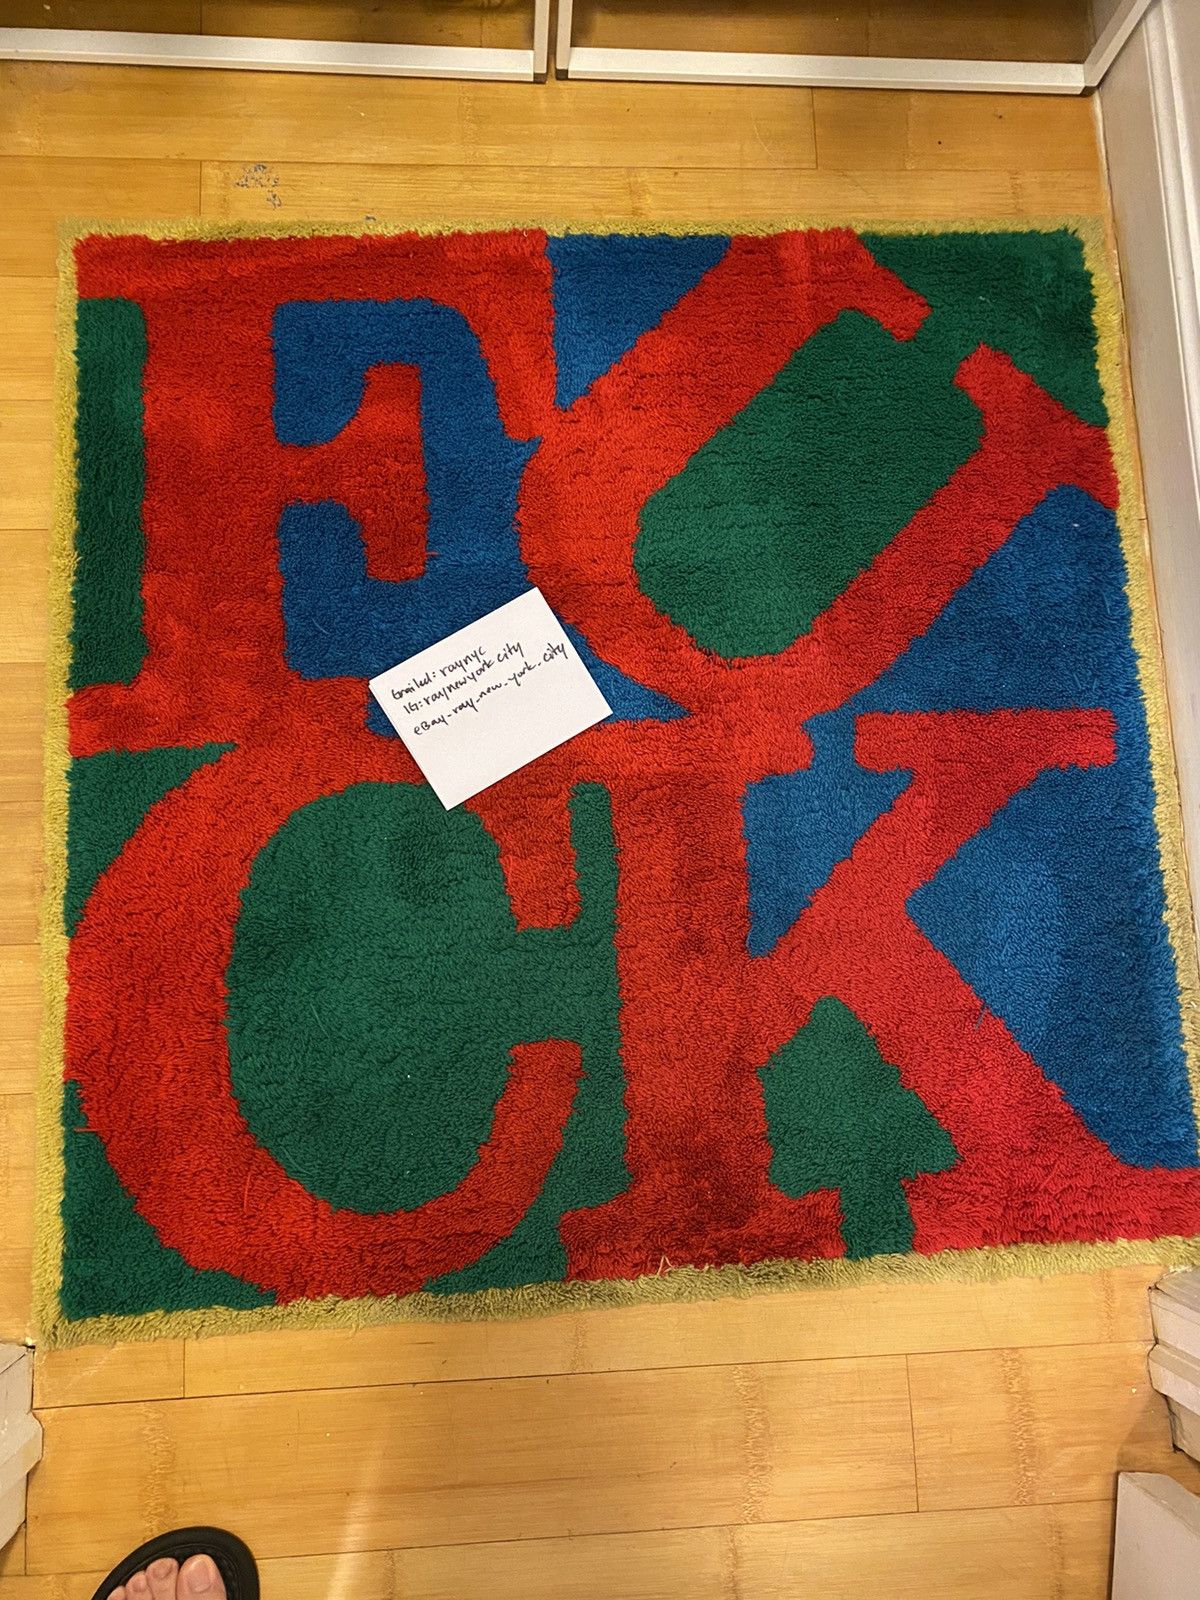 Supreme Gallery 1950 F*ck Rug Available For Immediate Sale At